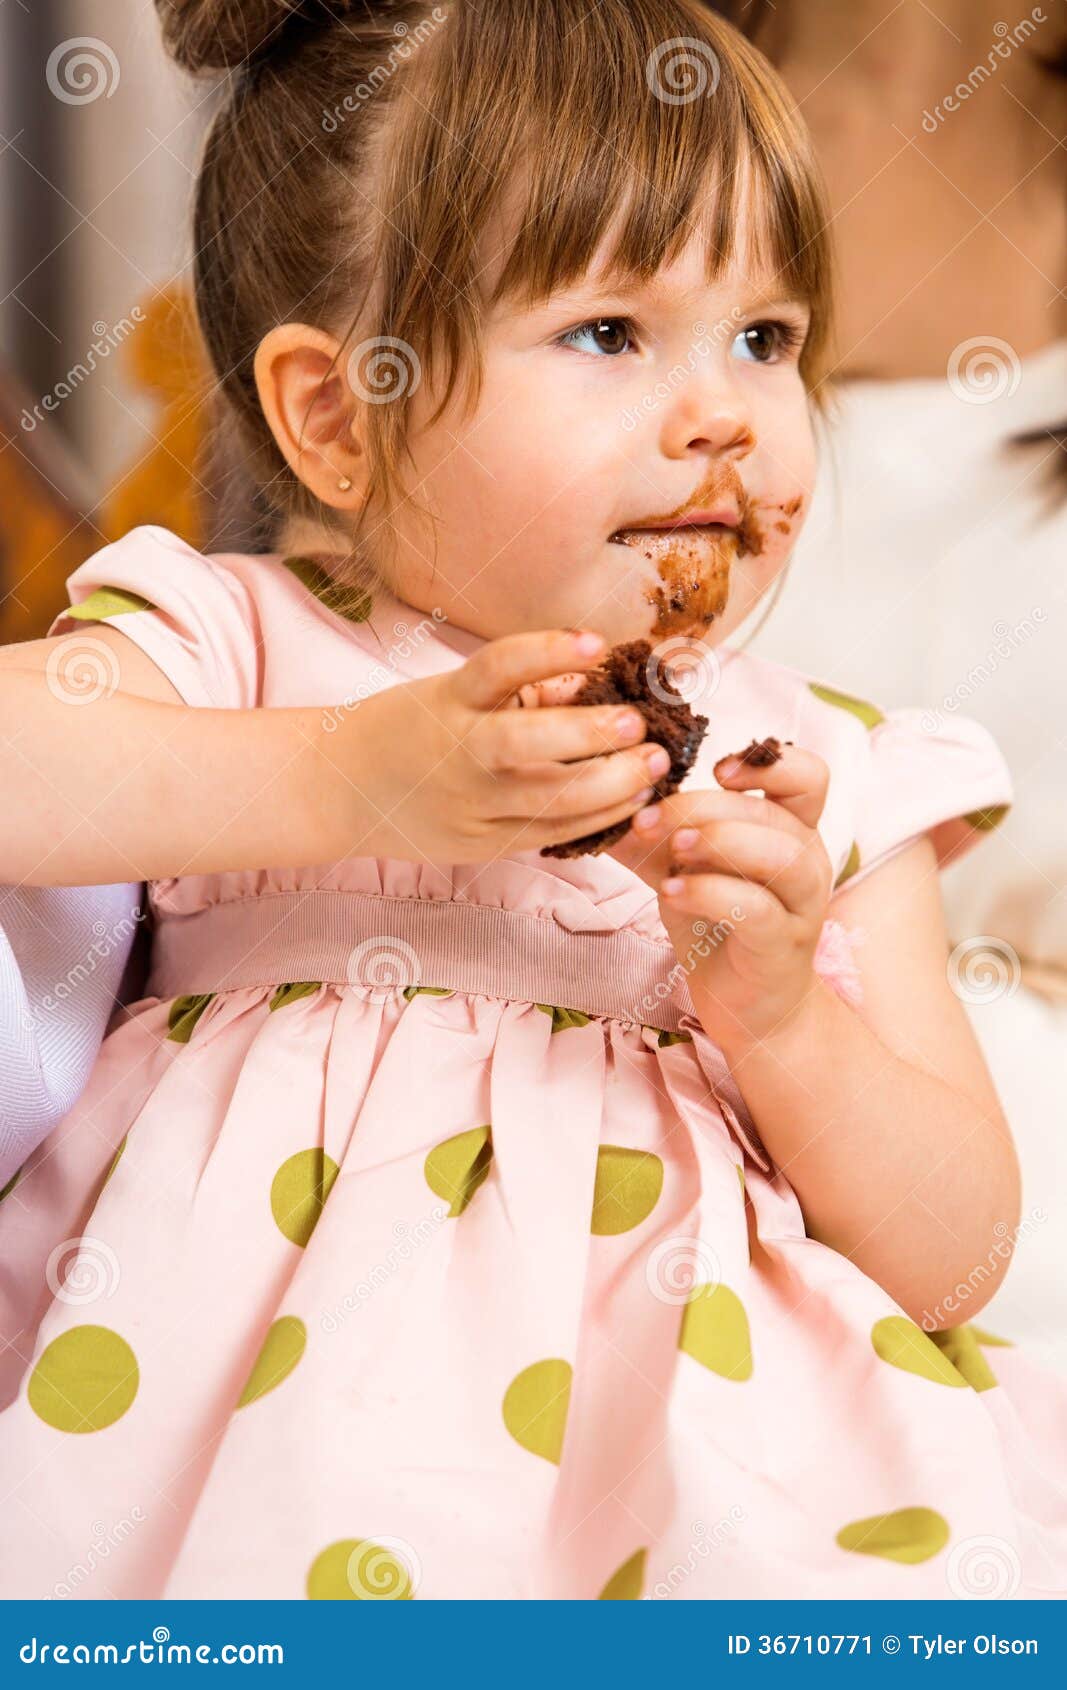 Birthday Girl Eating Cake With Icing On Her Face Stock Image - Image